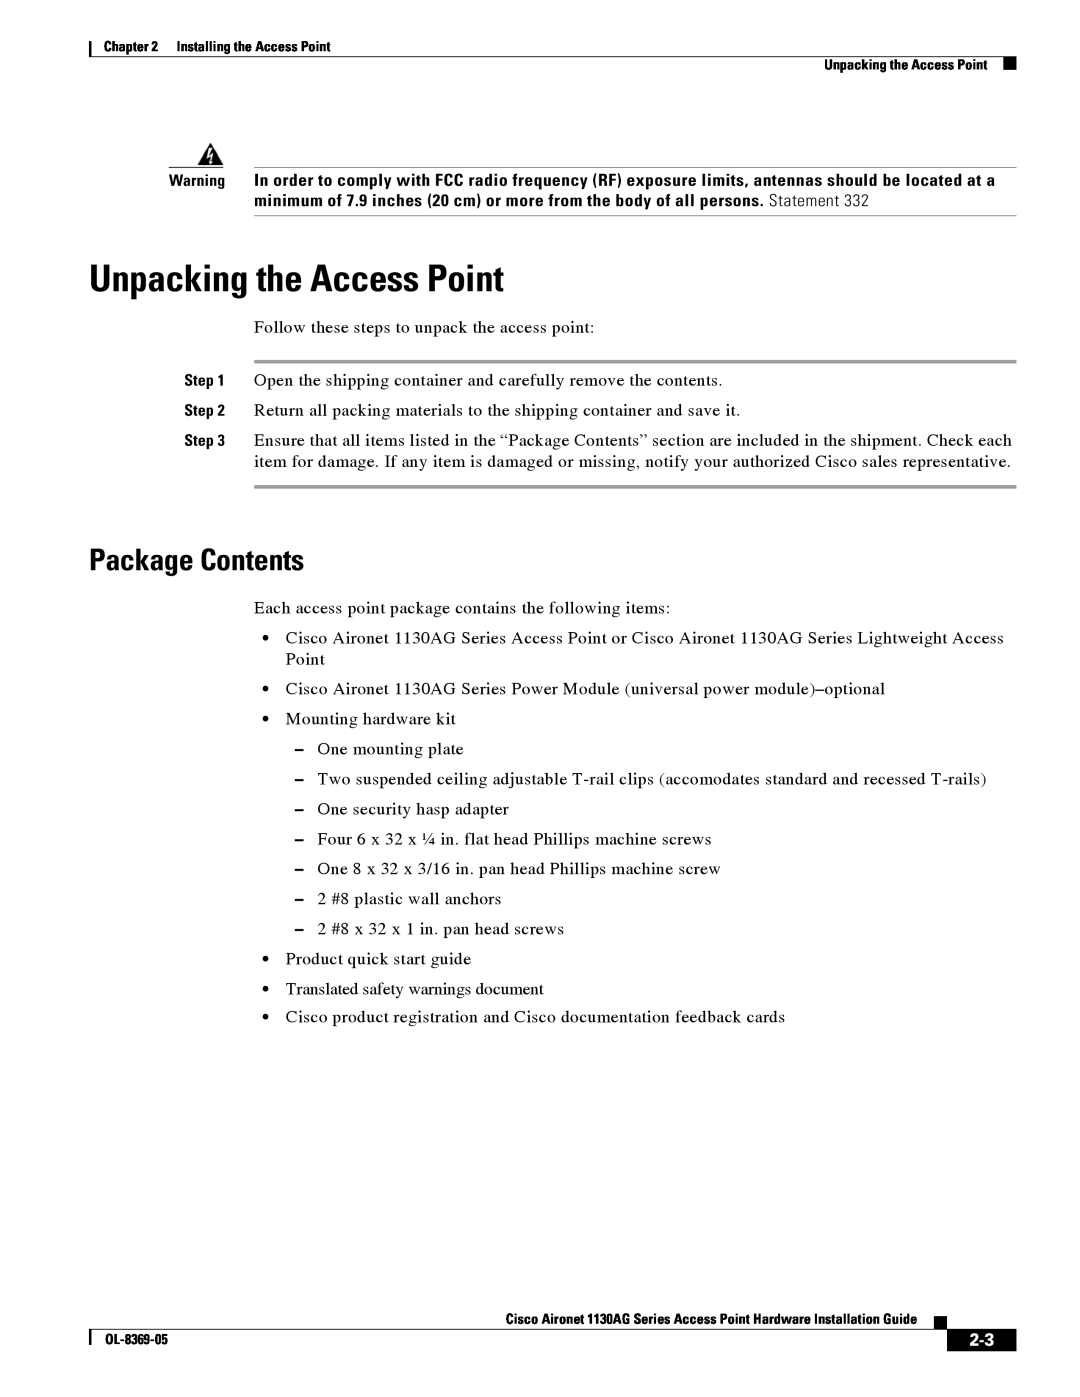 Cisco Systems 1130AG manual Unpacking the Access Point, Package Contents 